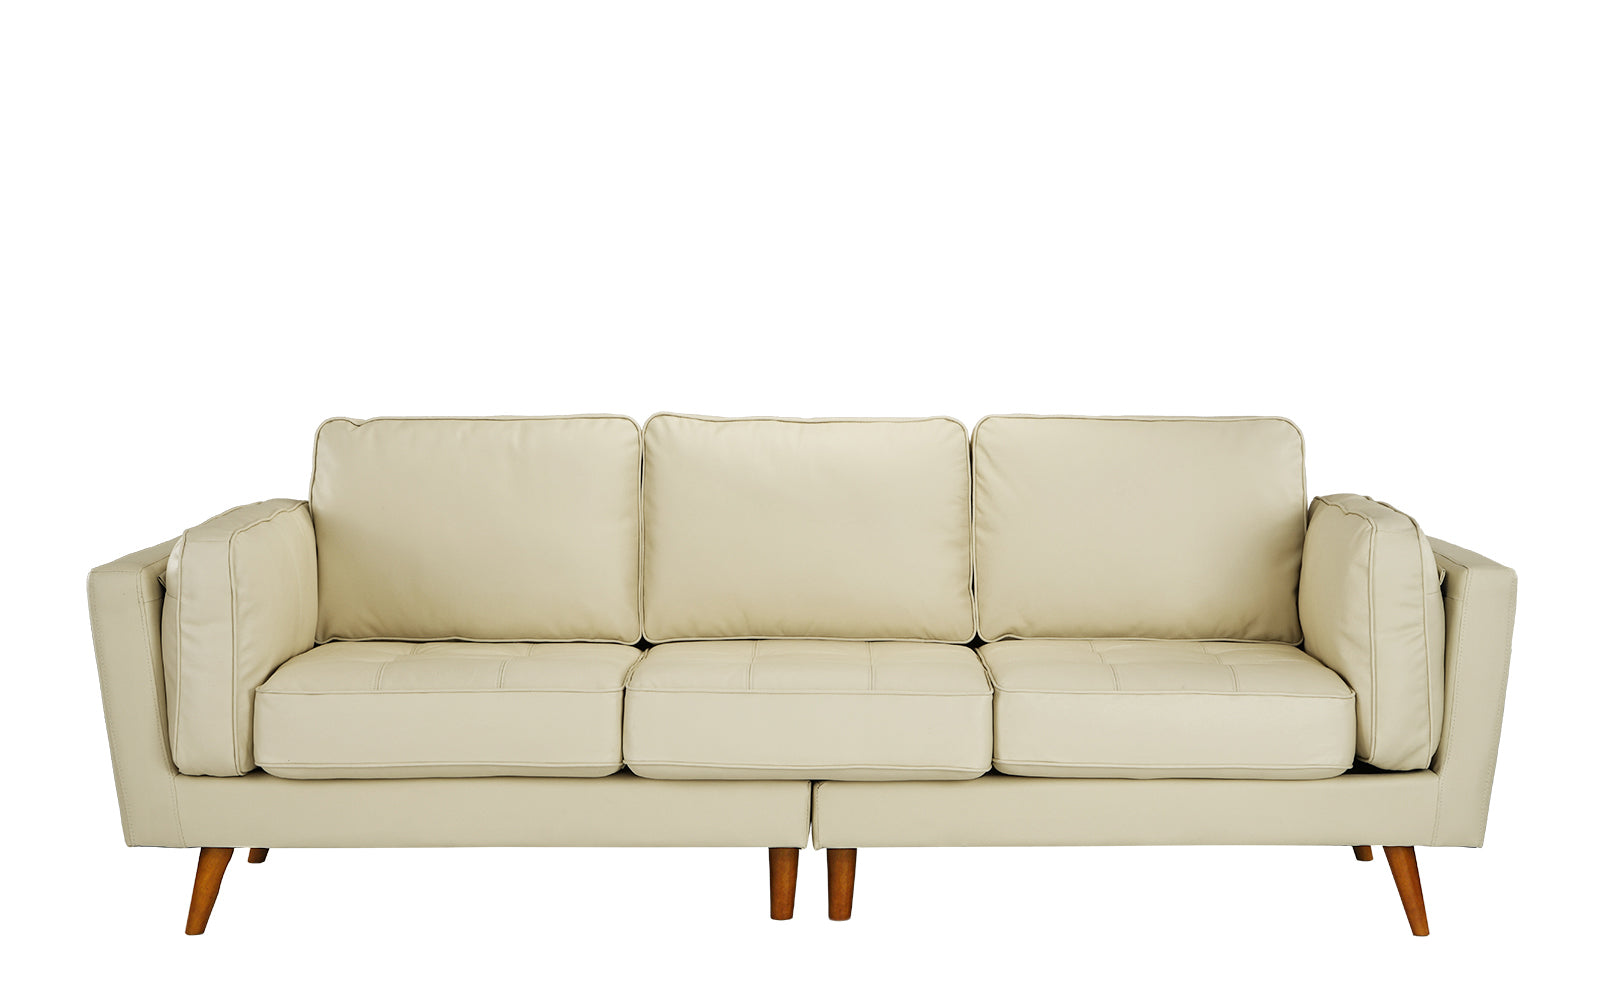 Mateo Mid-century Palm Springs Style Leather Match Sofa